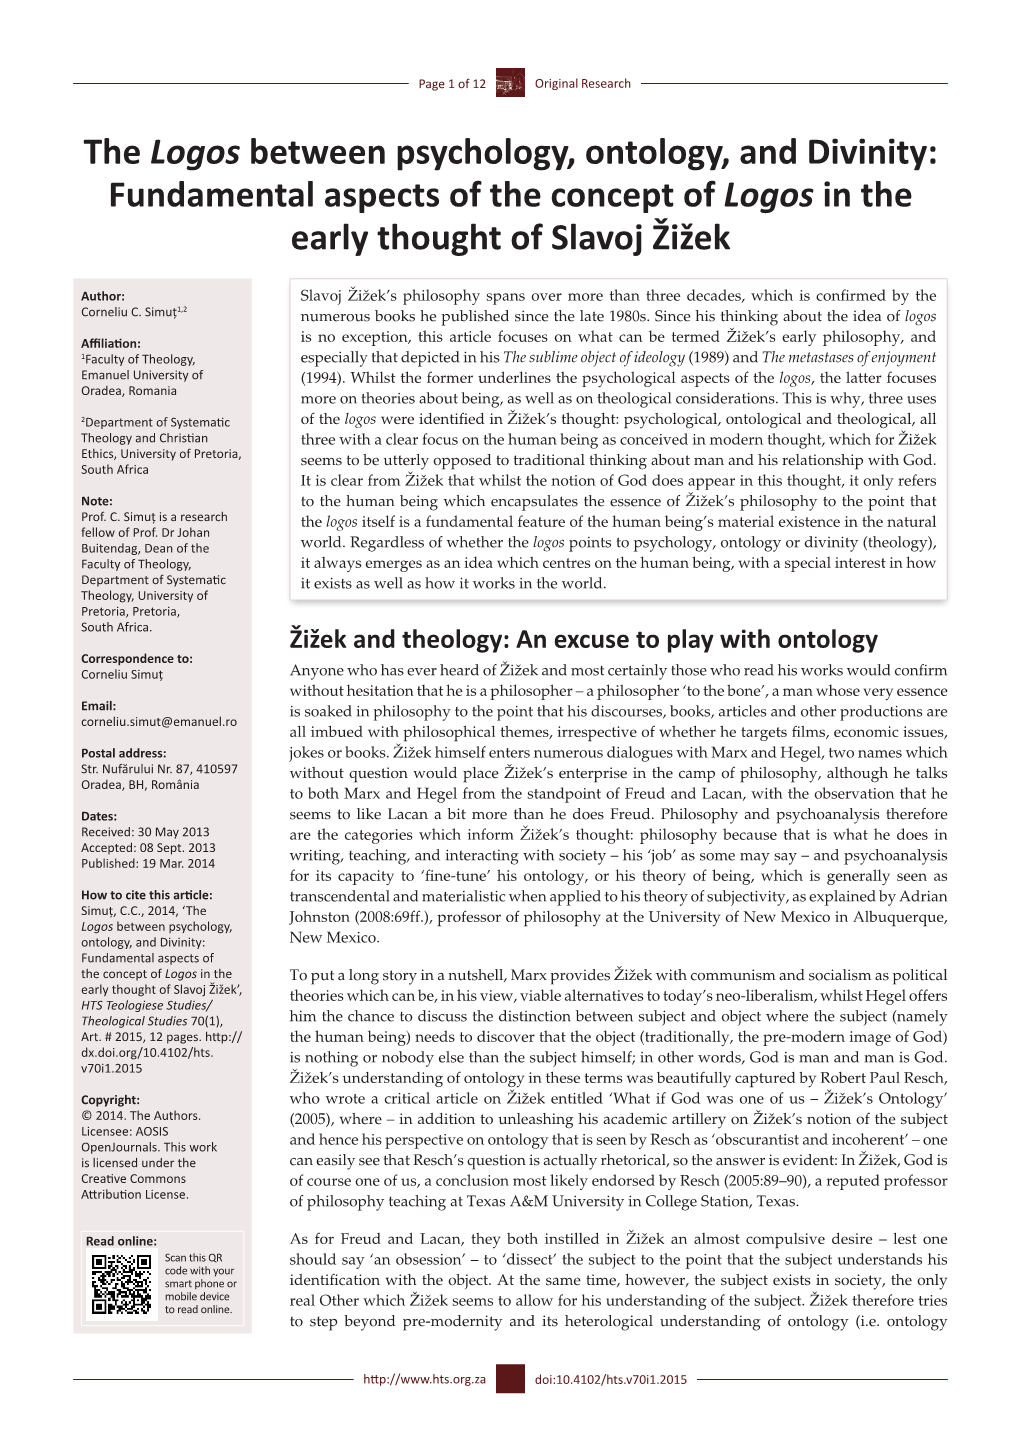 The Logos Between Psychology, Ontology, and Divinity: Fundamental Aspects of the Concept of Logos in the Early Thought of Slavoj Žižek